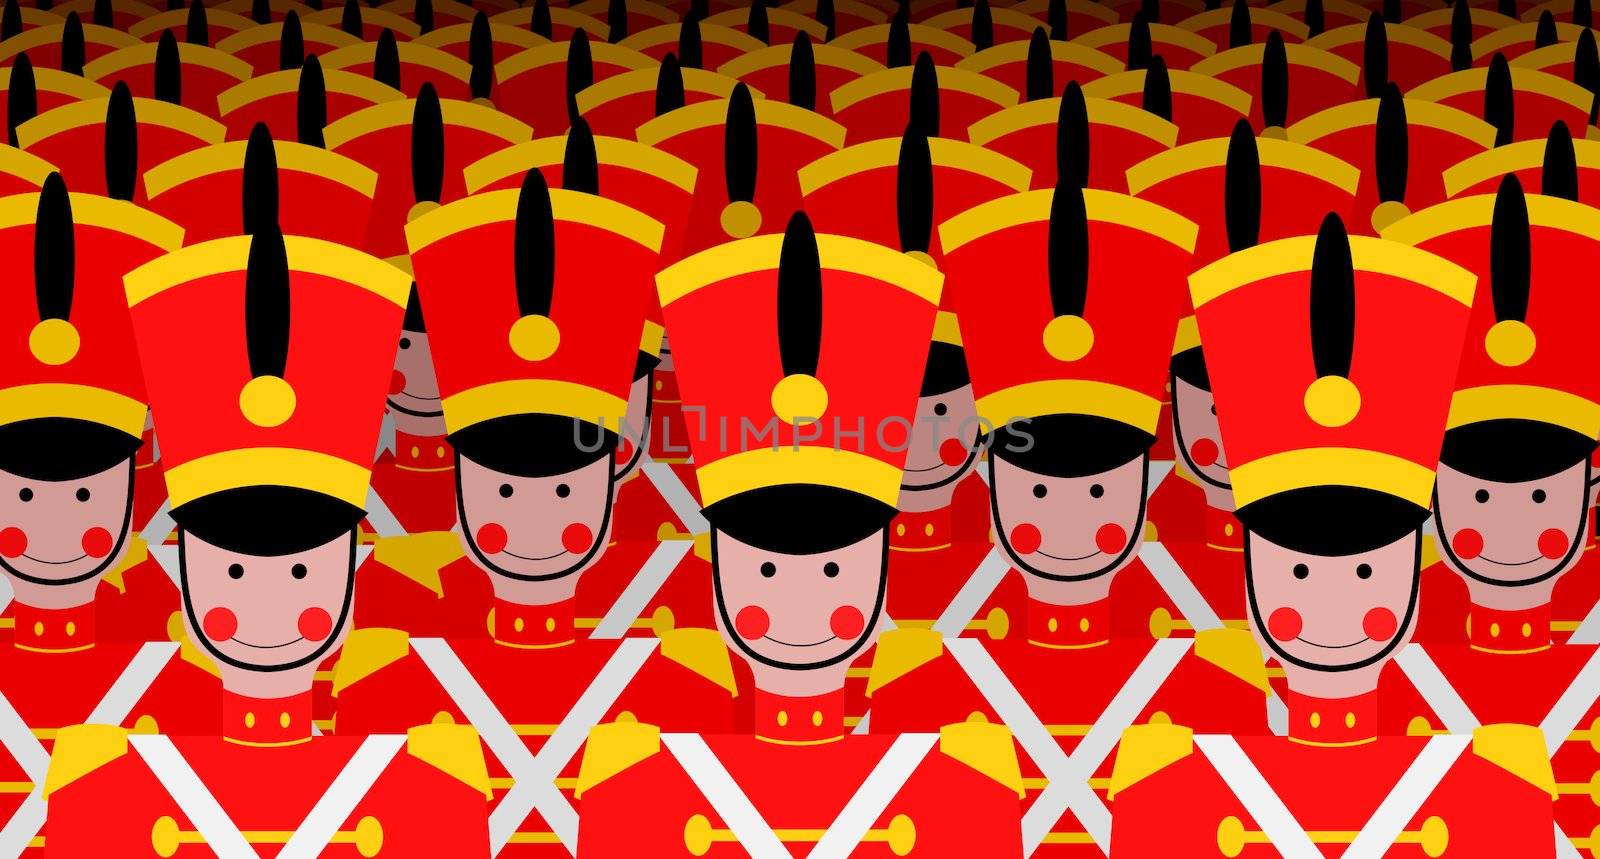 Illustration of lots of toy soldiers